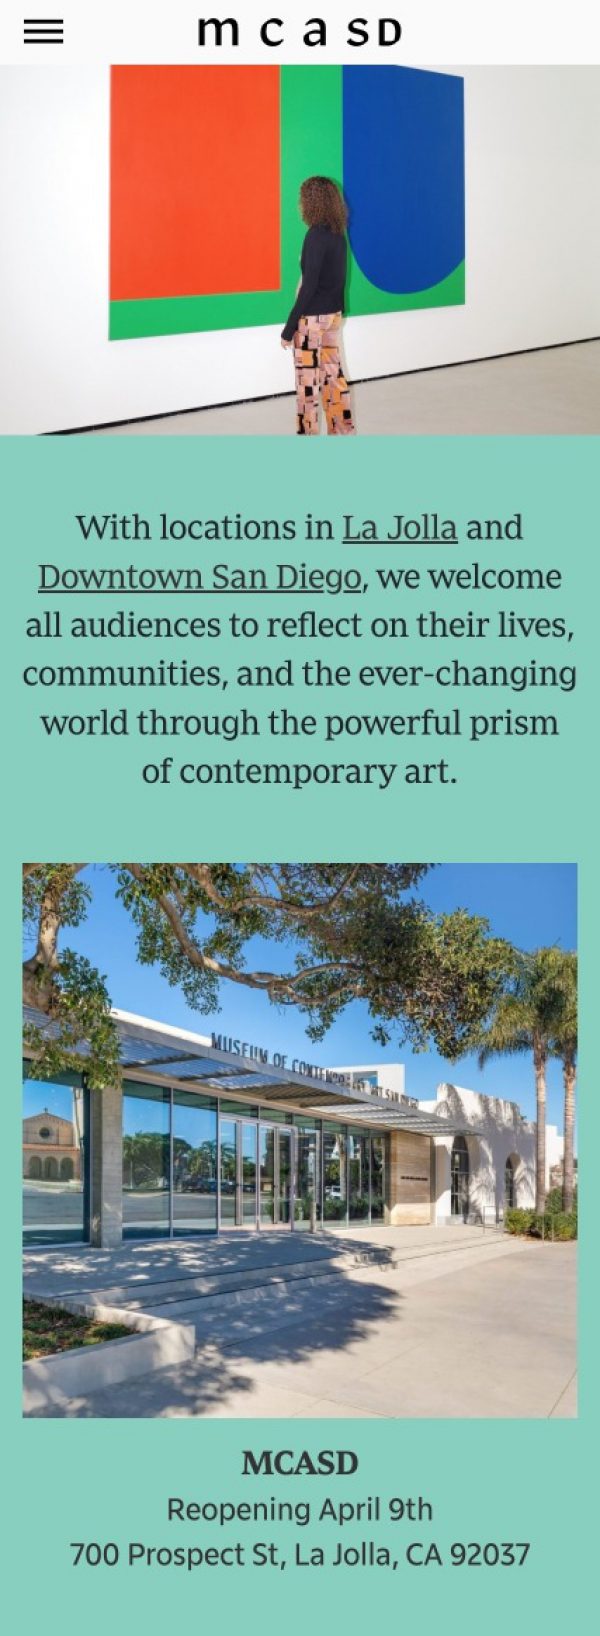 Screenshot of the Museum of Contemporary Art San Diego website's homepage